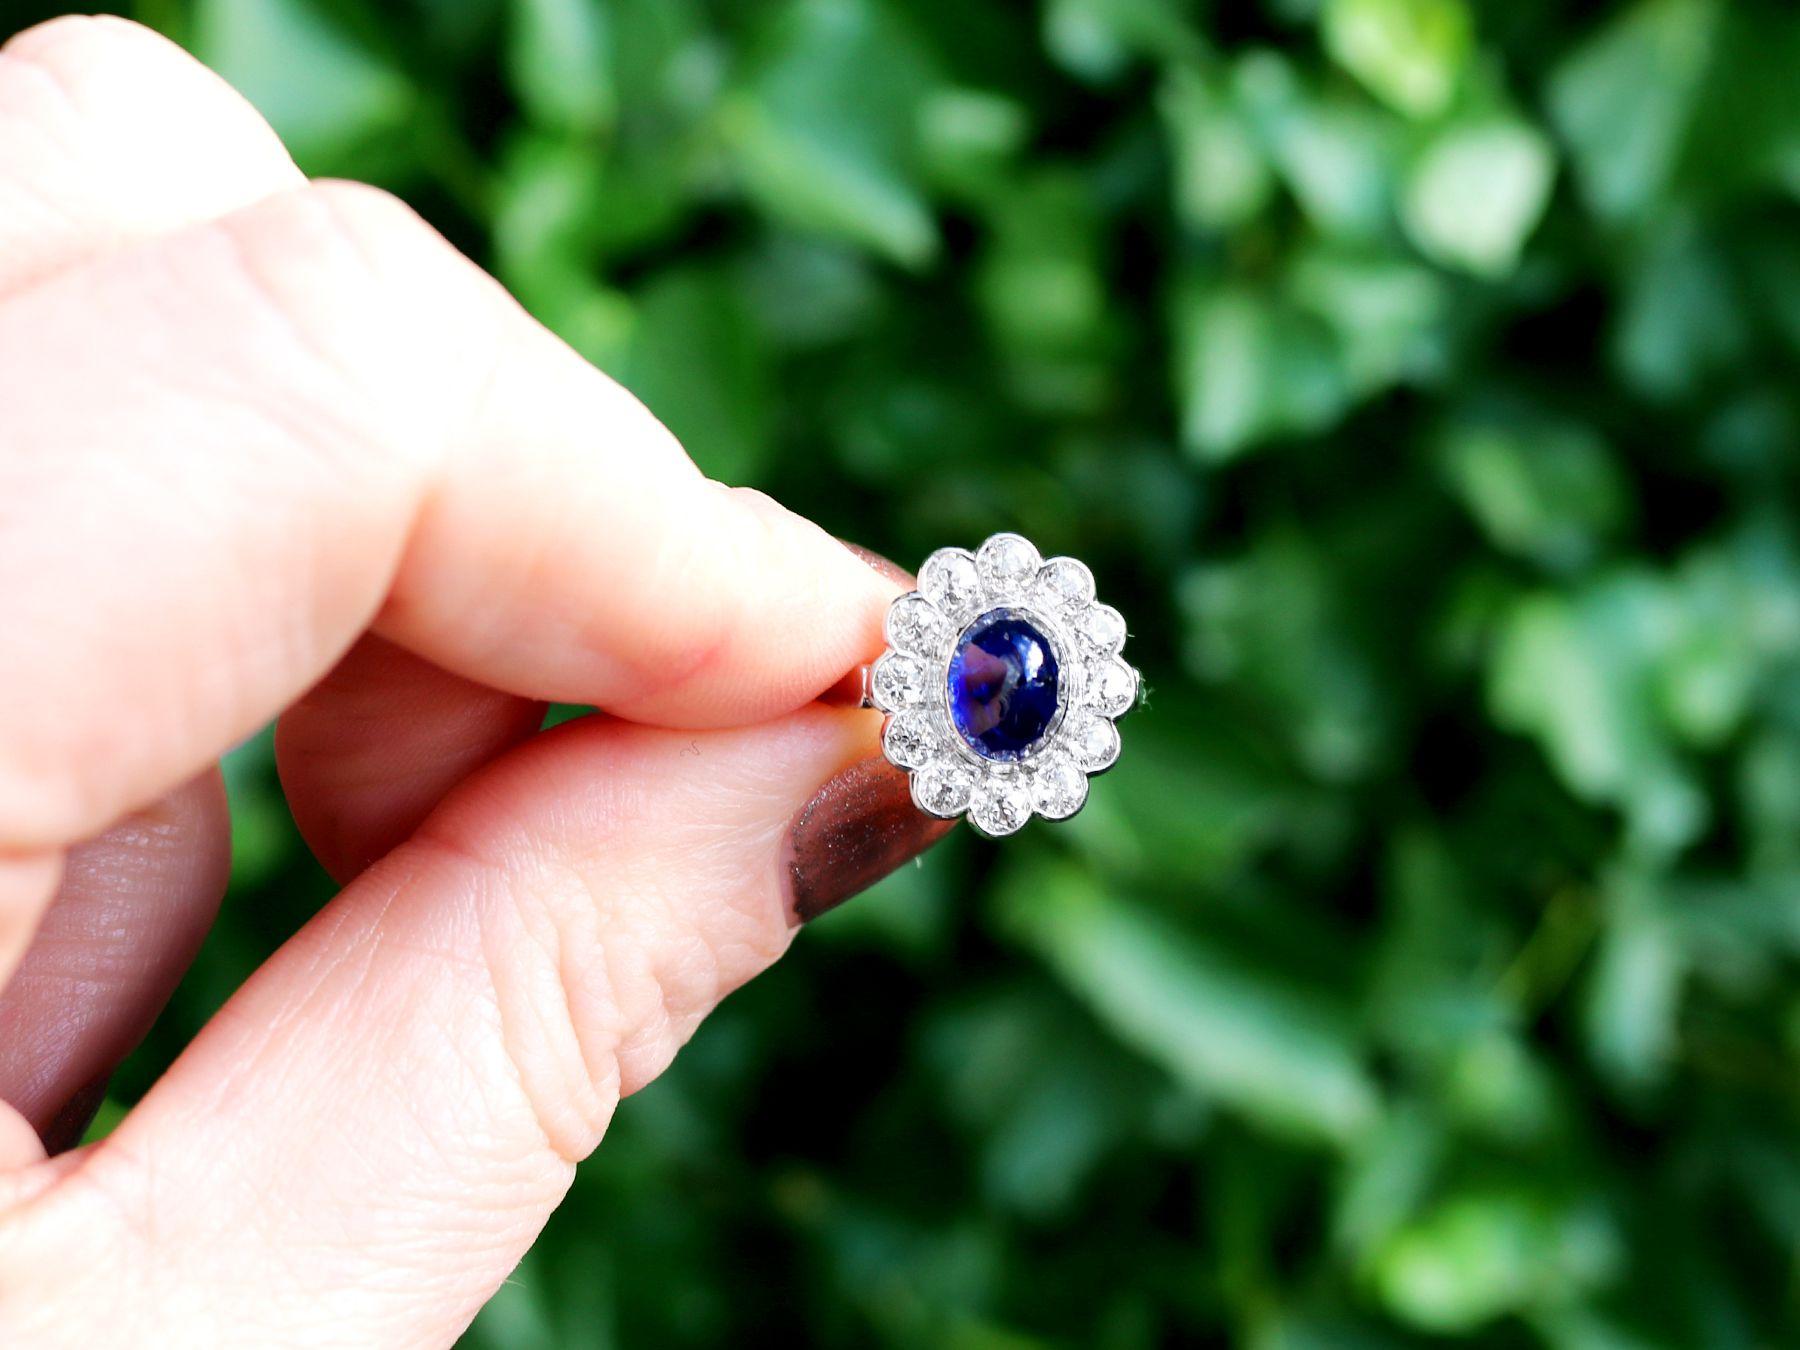 A stunning, fine and impressive 3.03 carat sapphire and 1.80 carat diamond, 15 karat white gold dress ring; part of our antique jewelry and estate jewelry collections.

This stunning, fine and impressive antique cabochon cut sapphire ring has been